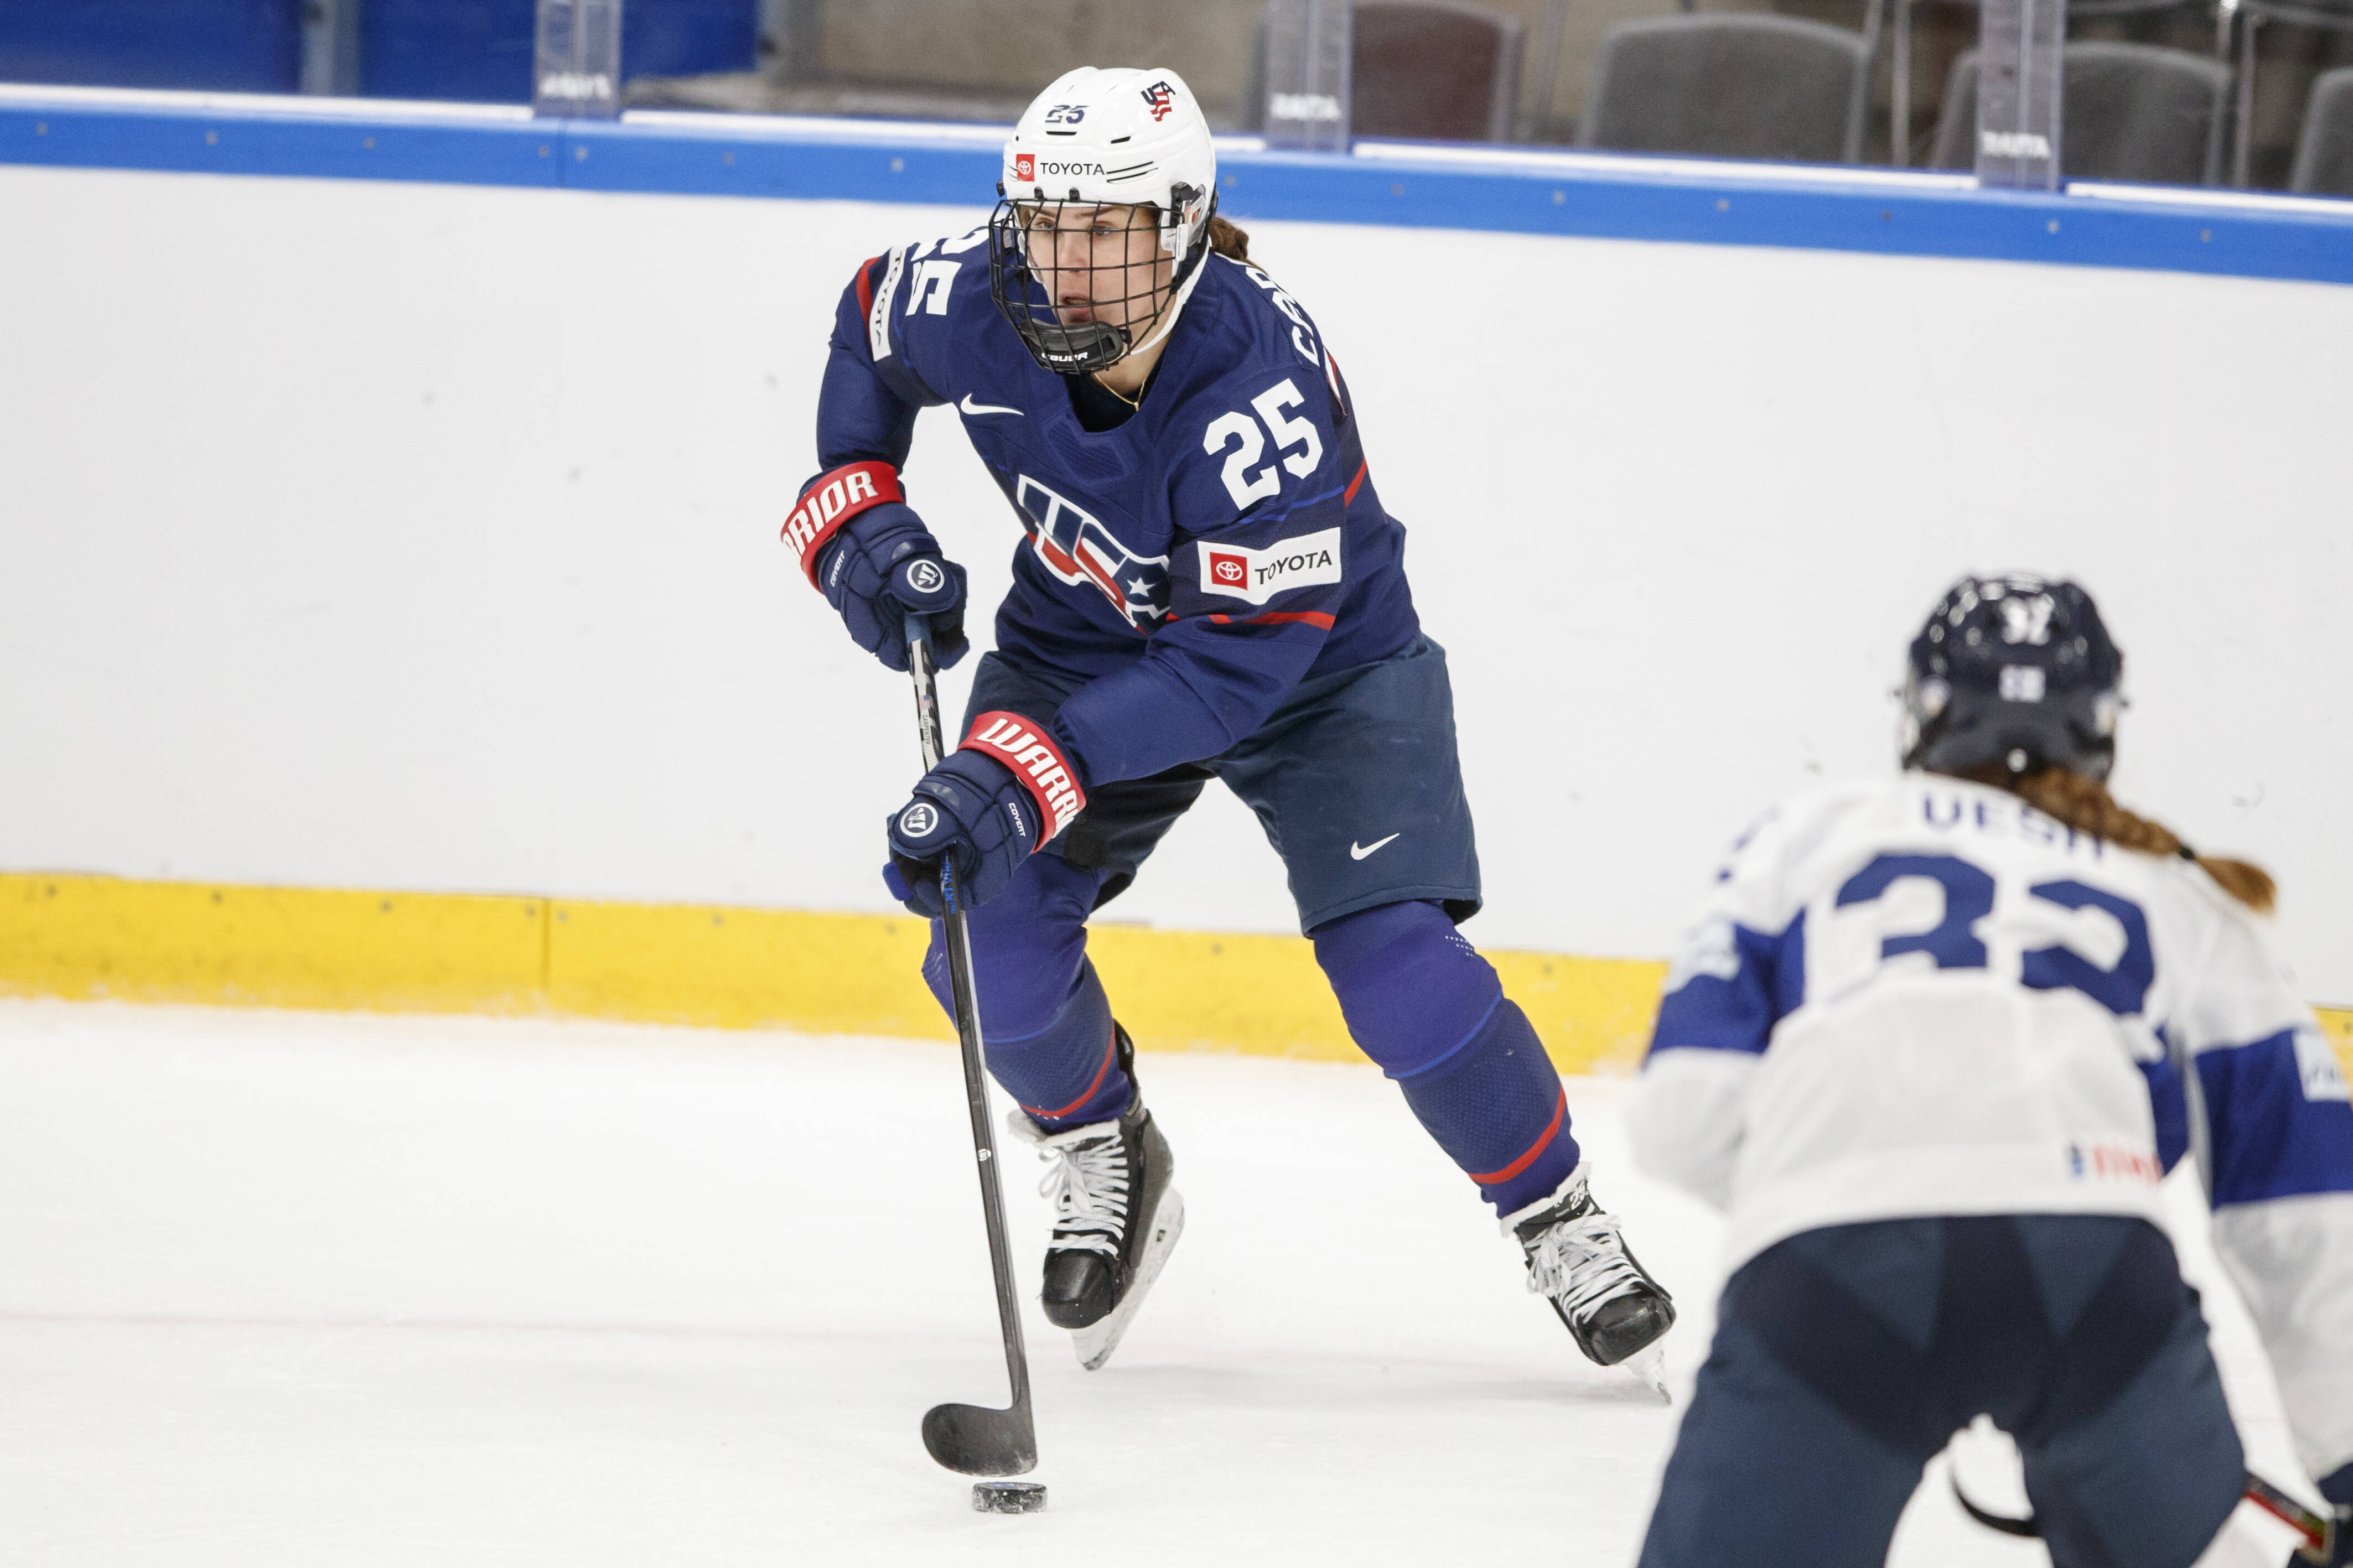 USA vs Finland Free Live Stream IIHF World Junior Championship - How to Watch and Stream Major League and College Sports